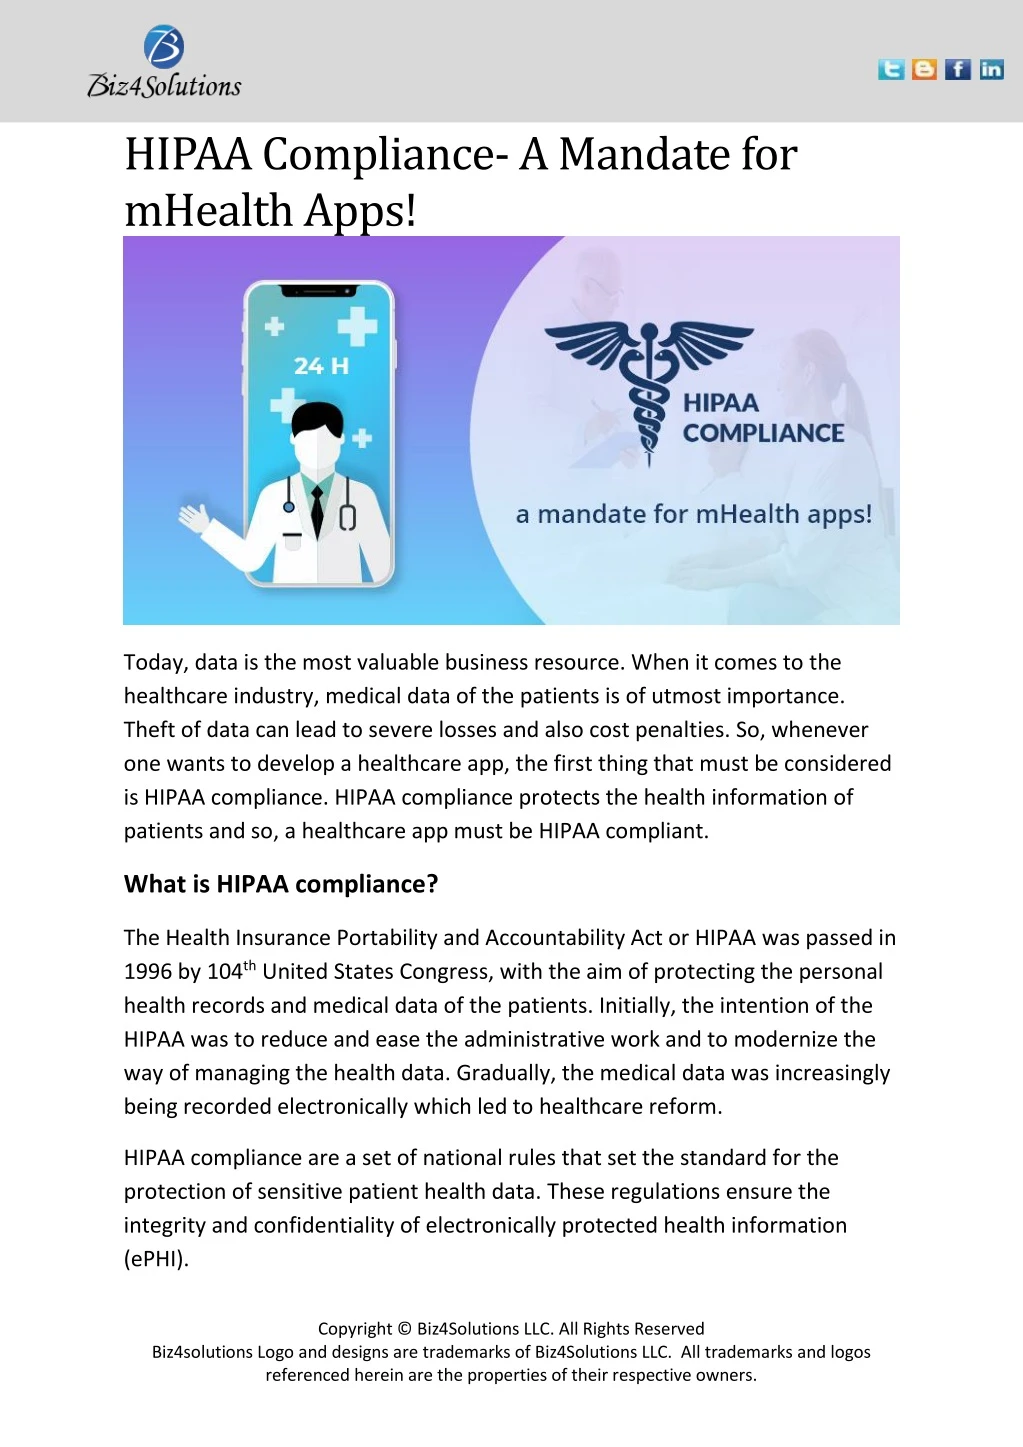 hipaa compliance a mandate for mhealth apps